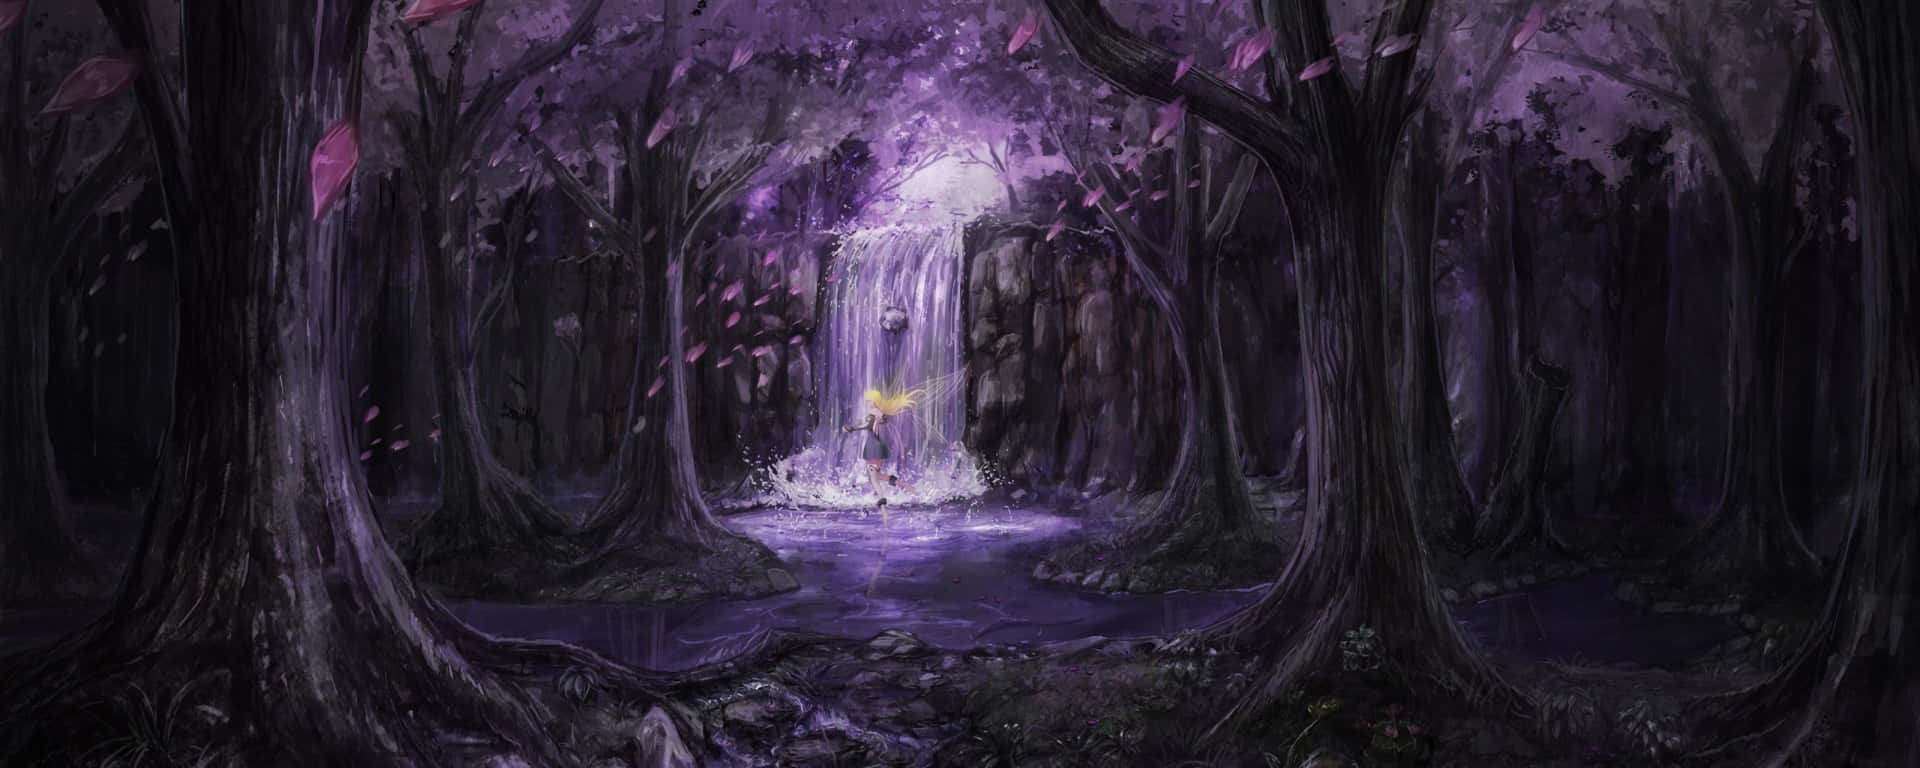 Dual Monitor Anime Fairy Magical Forest Wallpaper